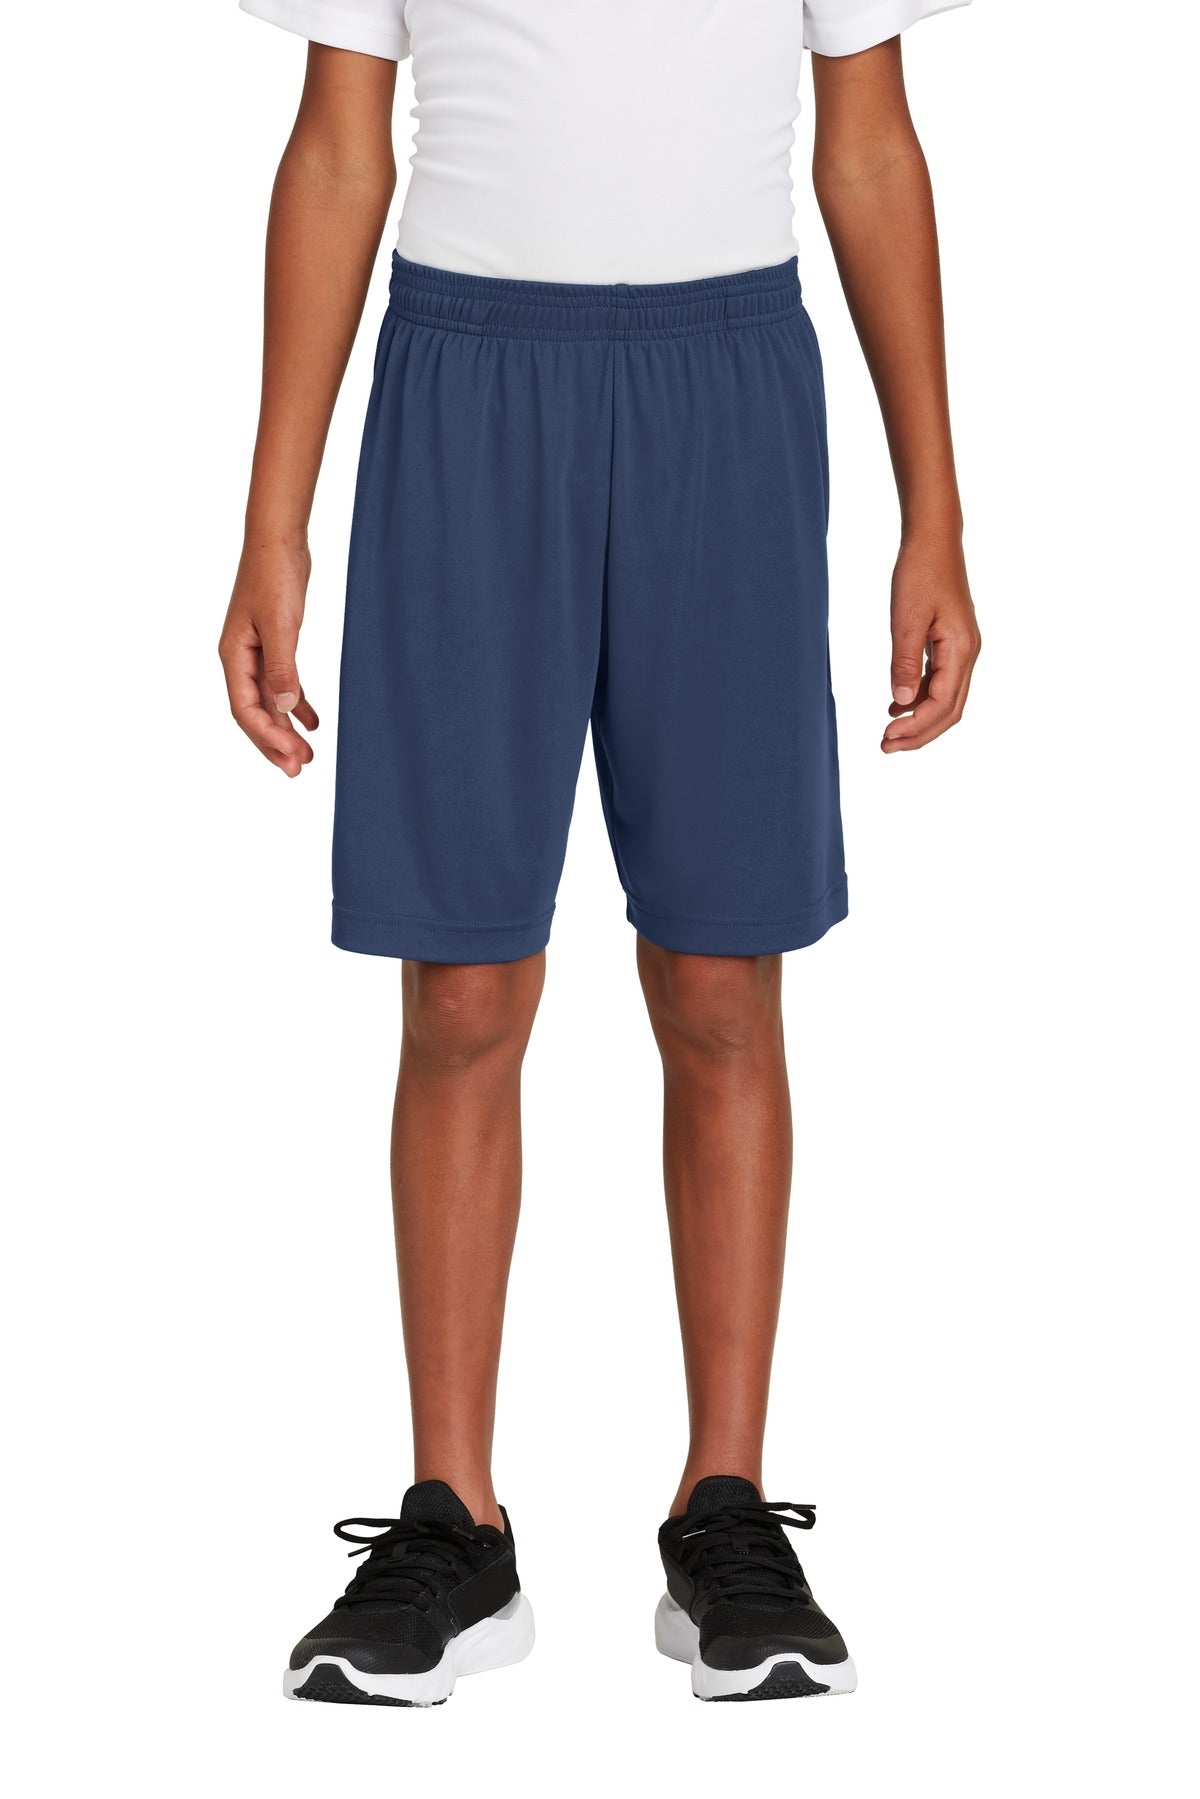 Sport-Tek Youth PosiCharge Competitor ™ Pocketed Short. YST355P